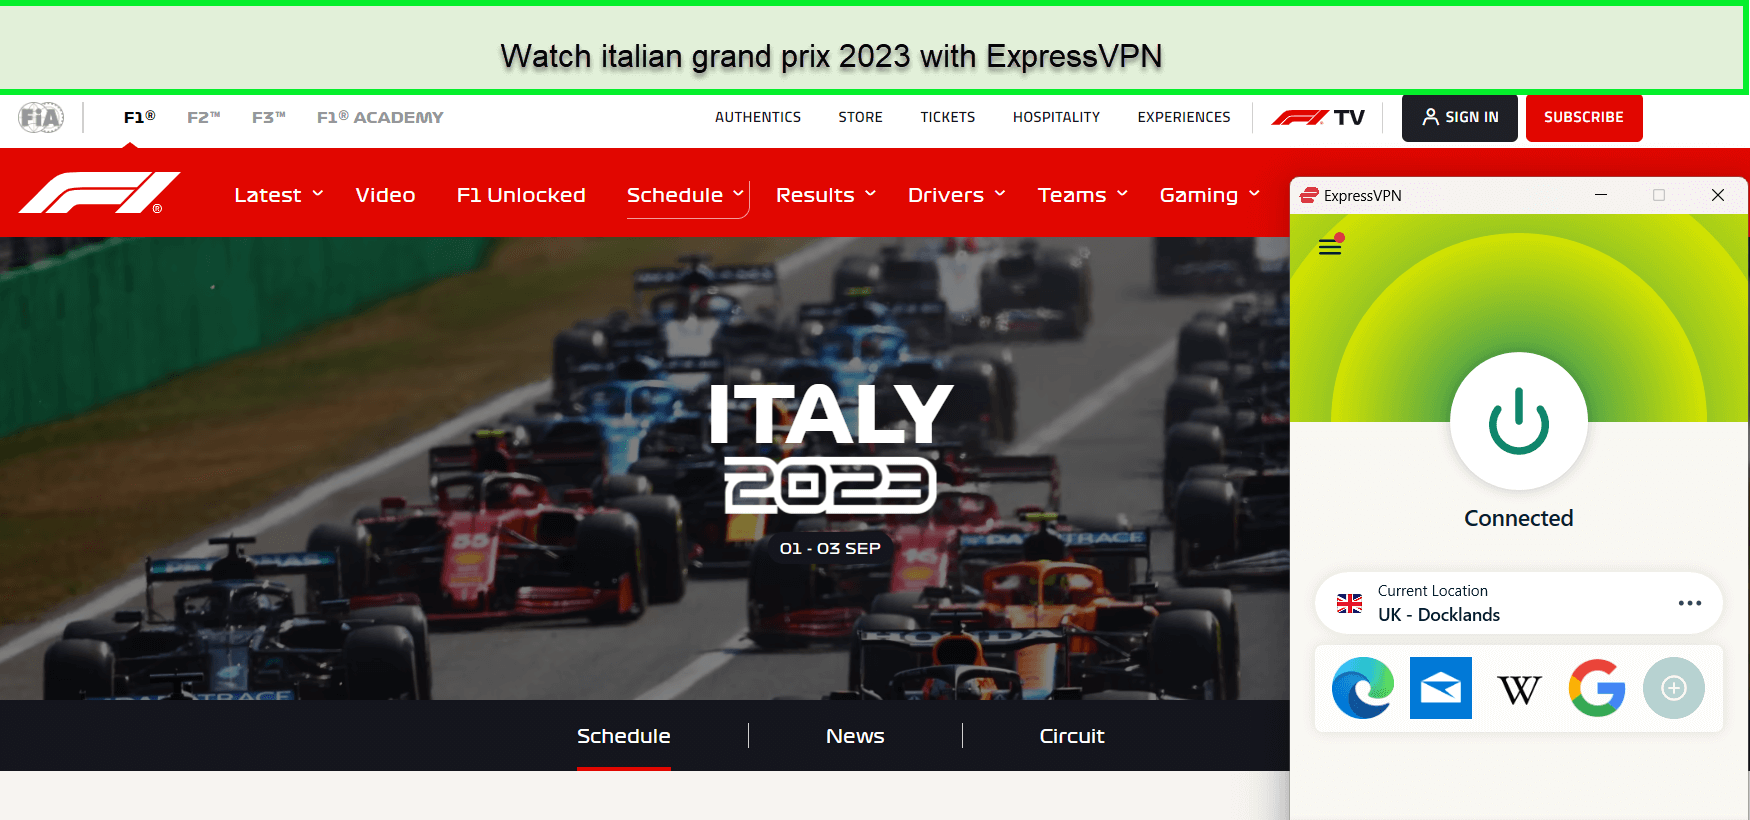 How-to-Watch-Italian-Grand-Prix-2023-in-New Zealand-on-ITV-with-ExpressVPN